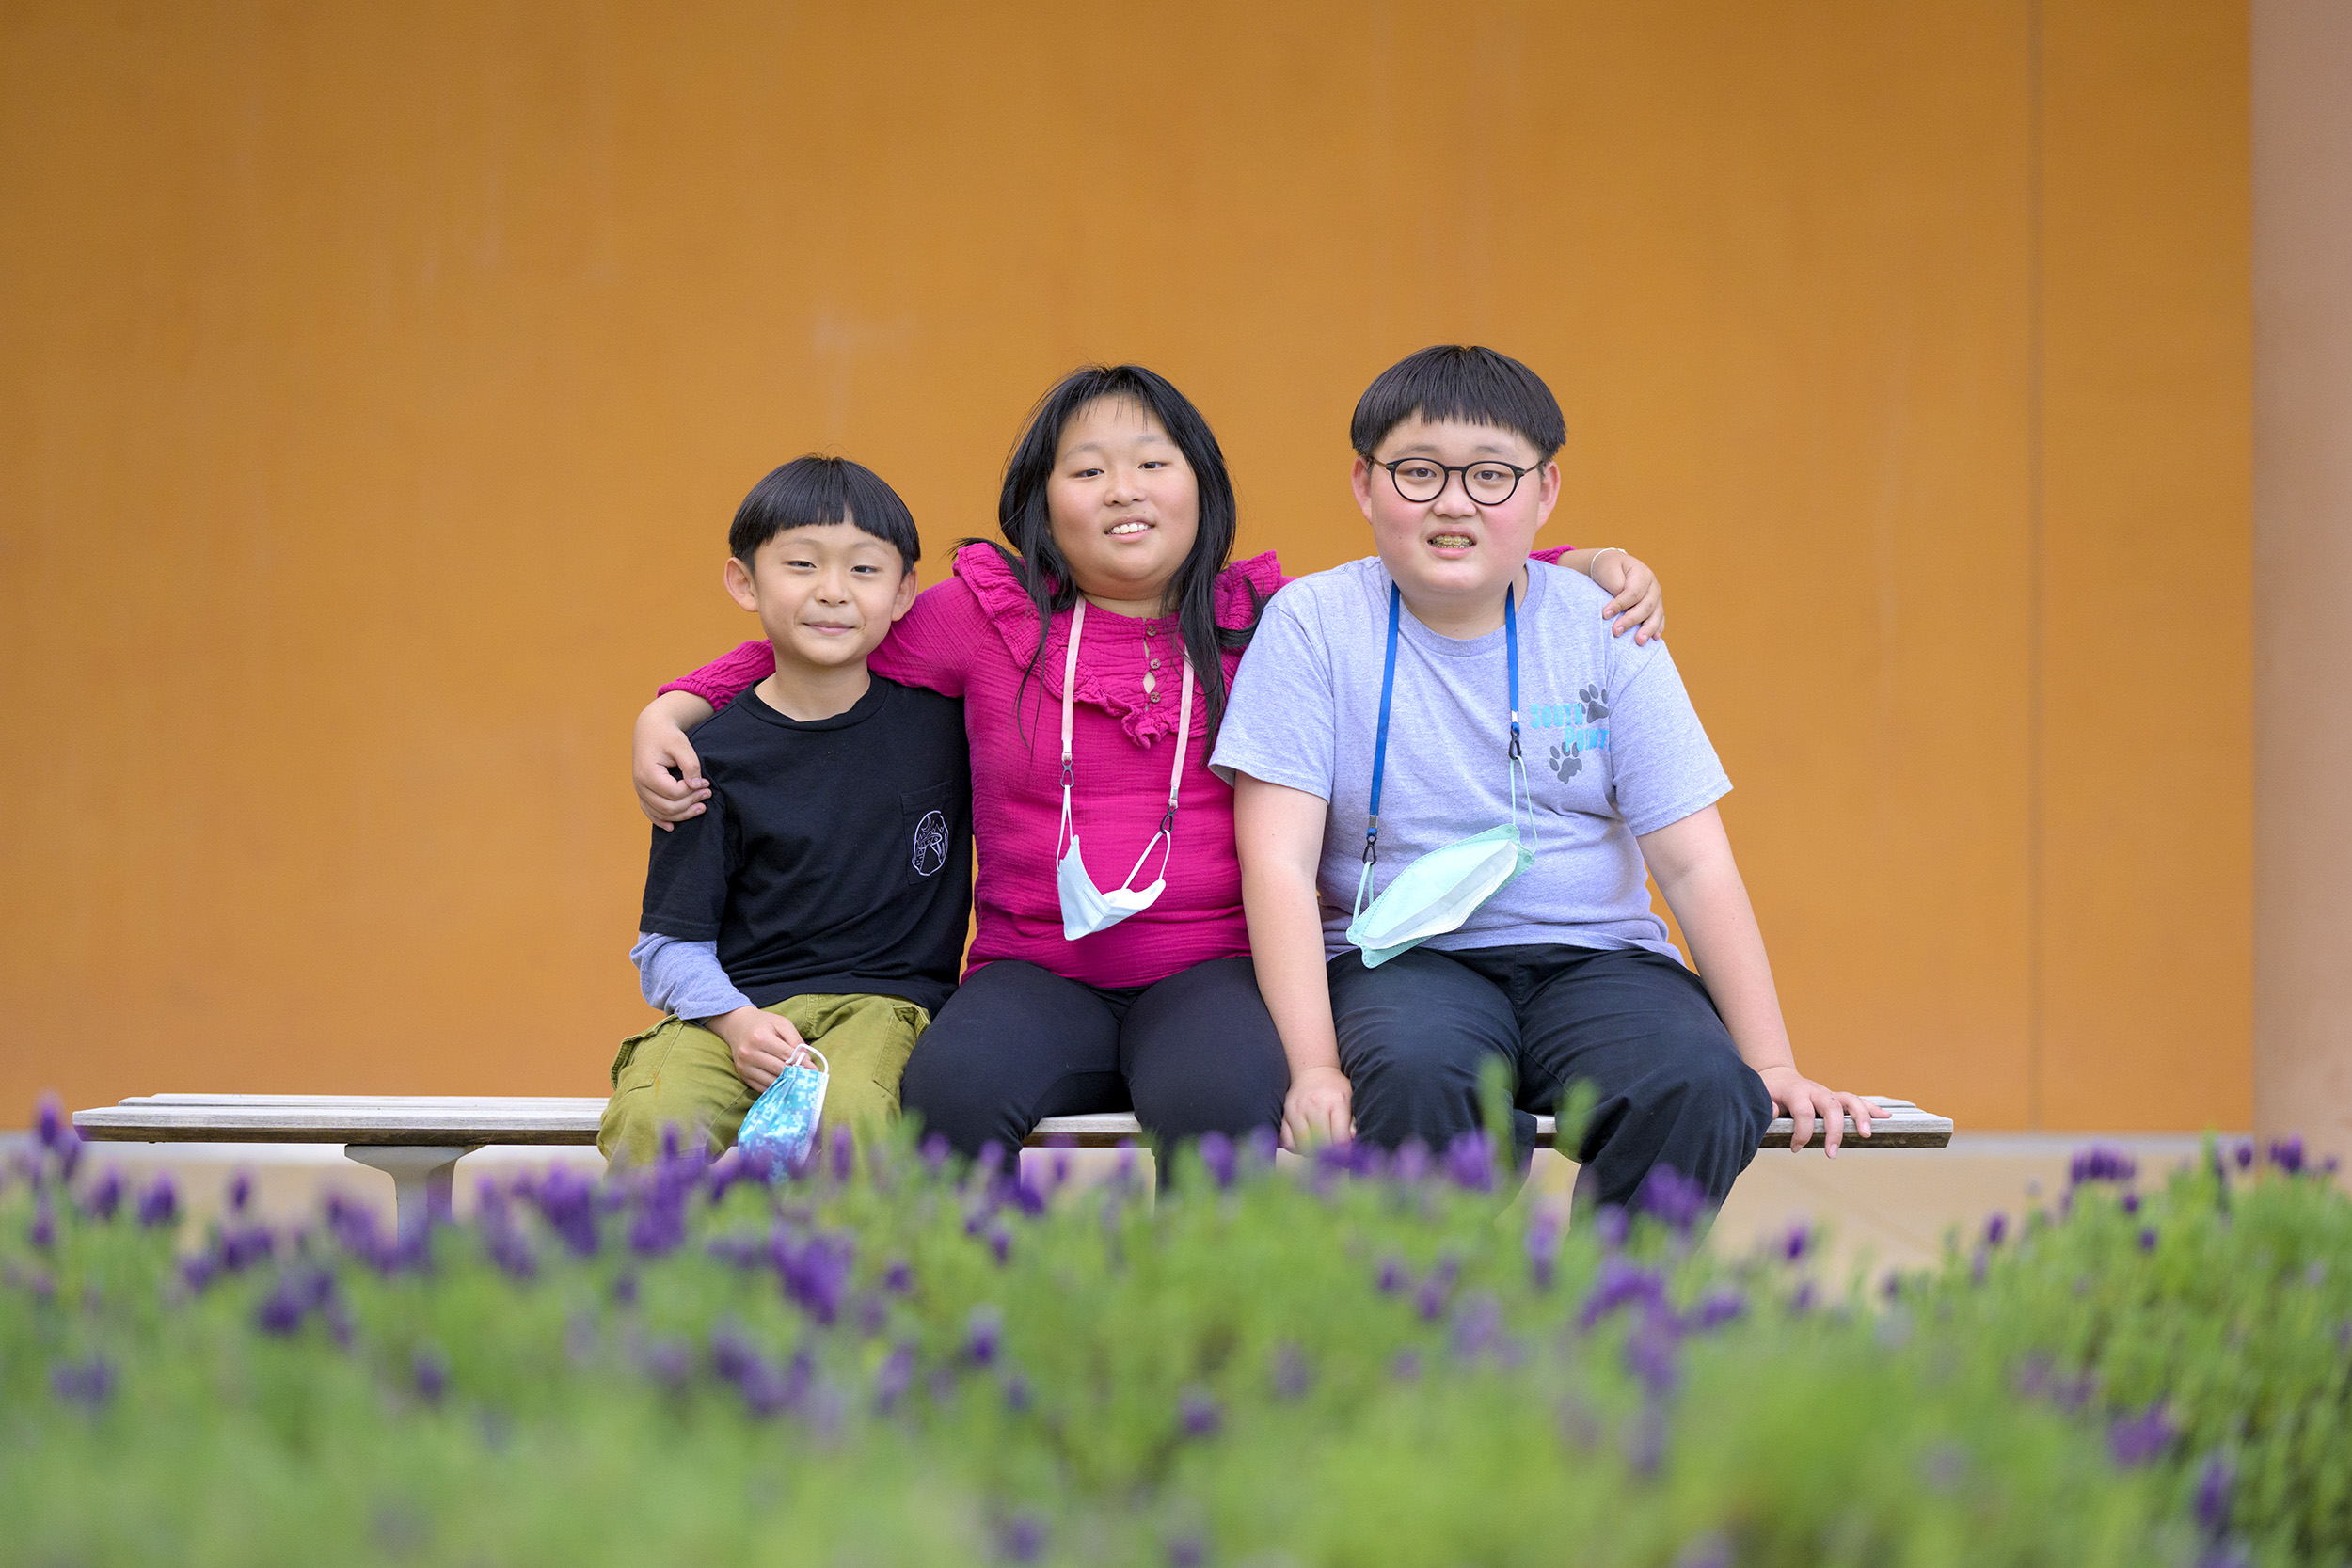 A family of participants sit together on a bench after a group activity.